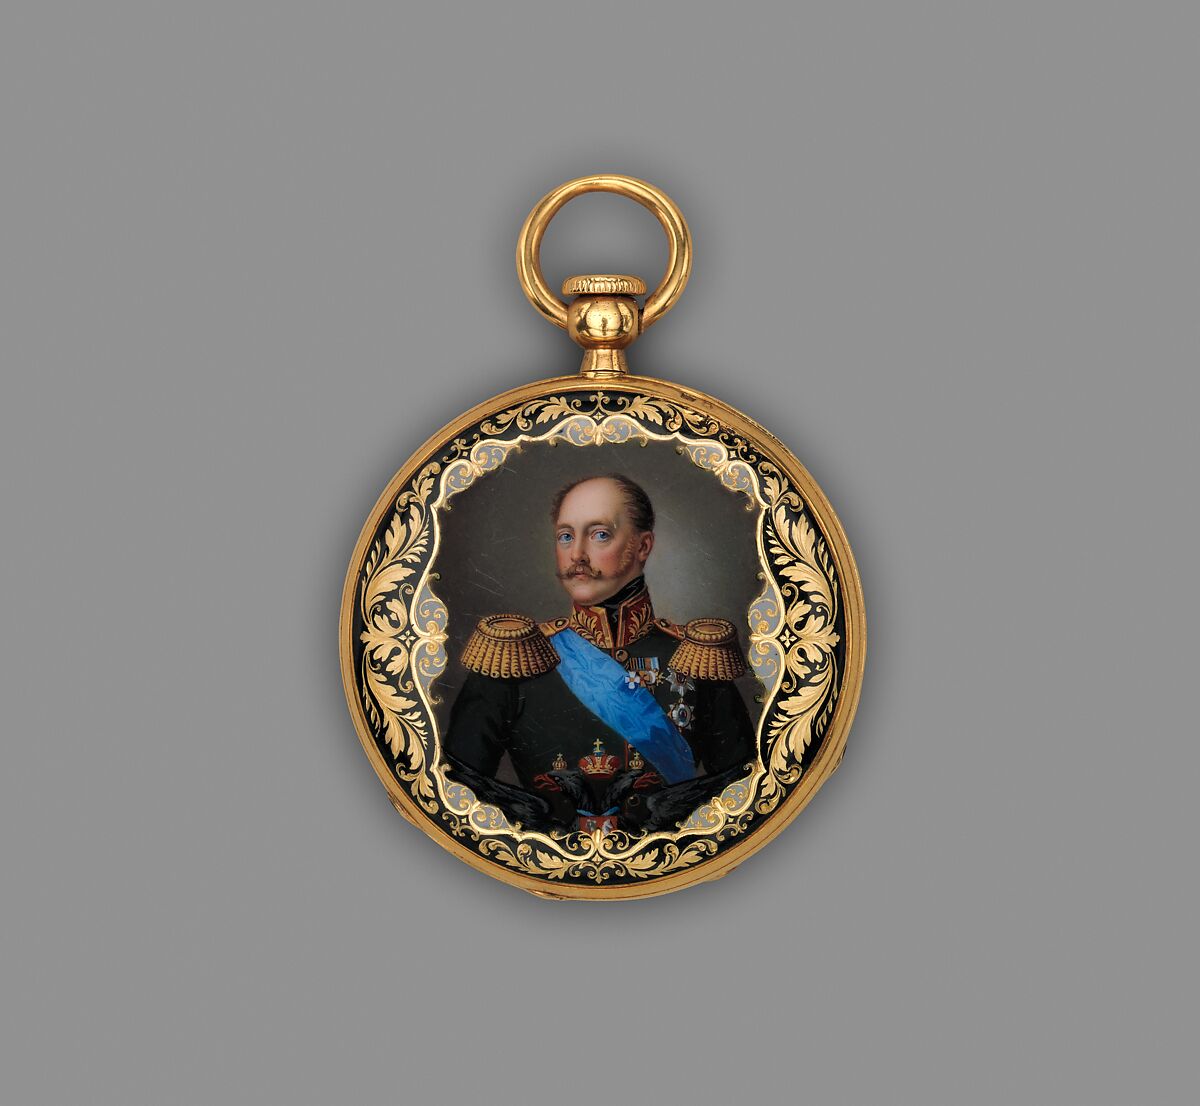 Watch, Watchmaker: François Czapek (Bohemian, 1811–before 1895), Case: partly enameled gold; Dial: white enamel with gold hands; Movement: gilded brass and steel, Swiss, Geneva 